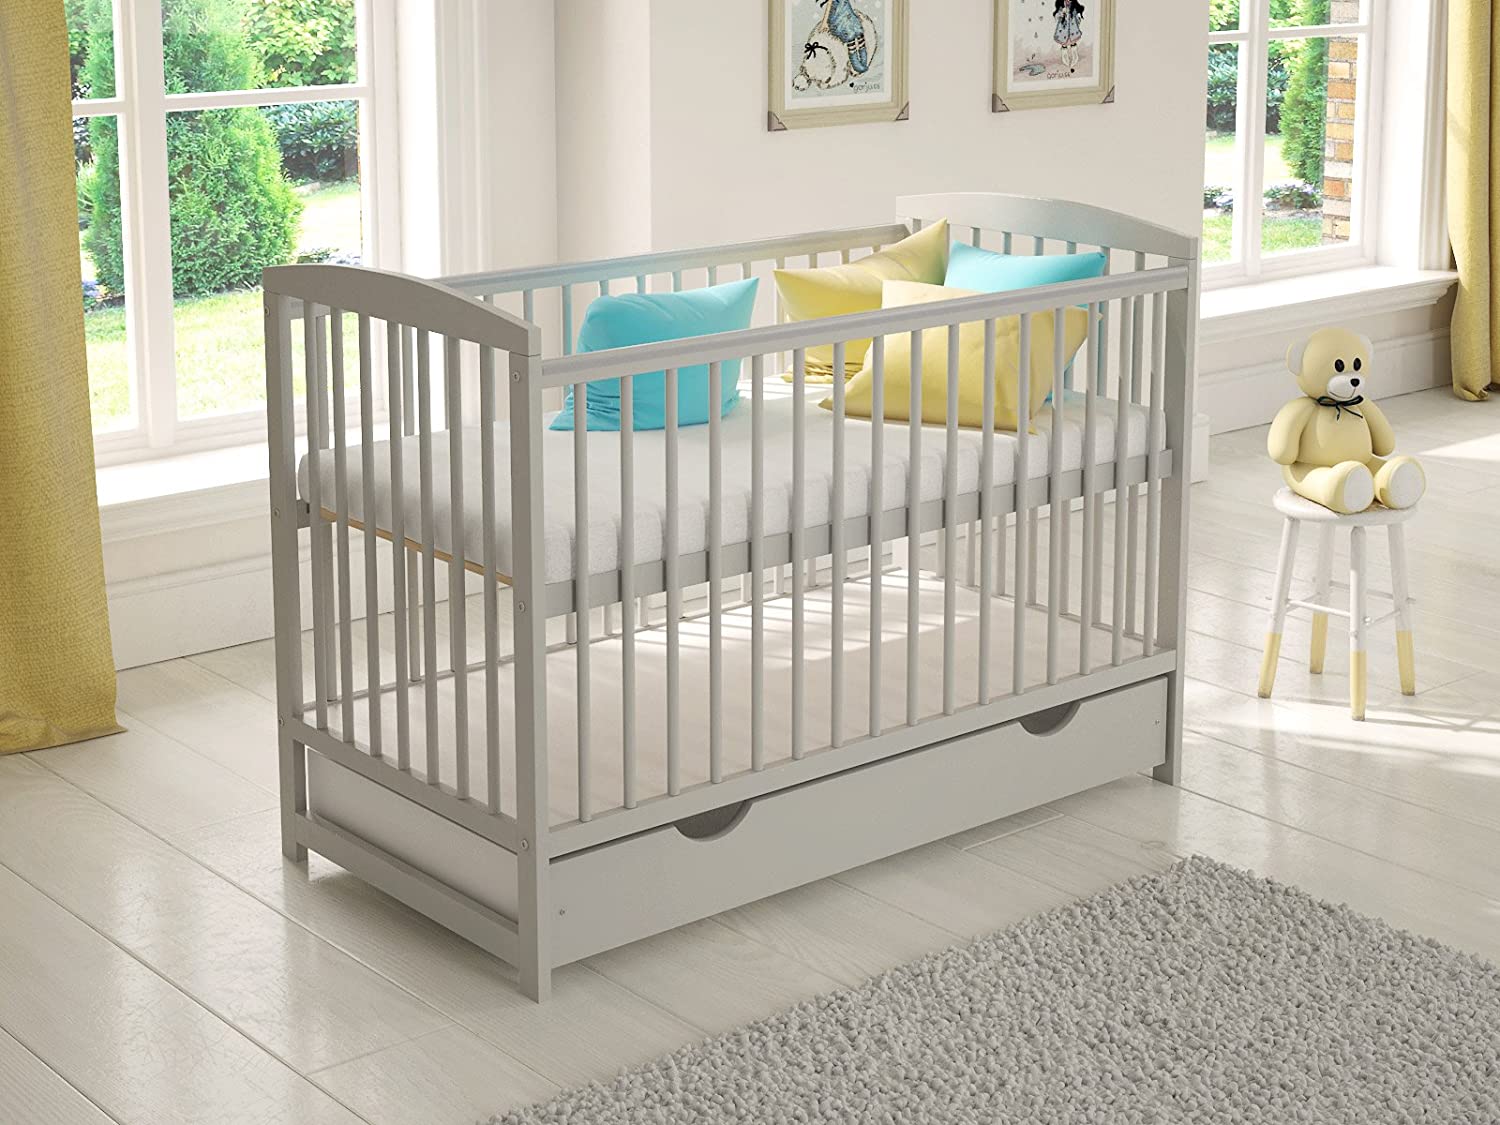 Wooden Baby Cot with Drawer - USTAD HOME